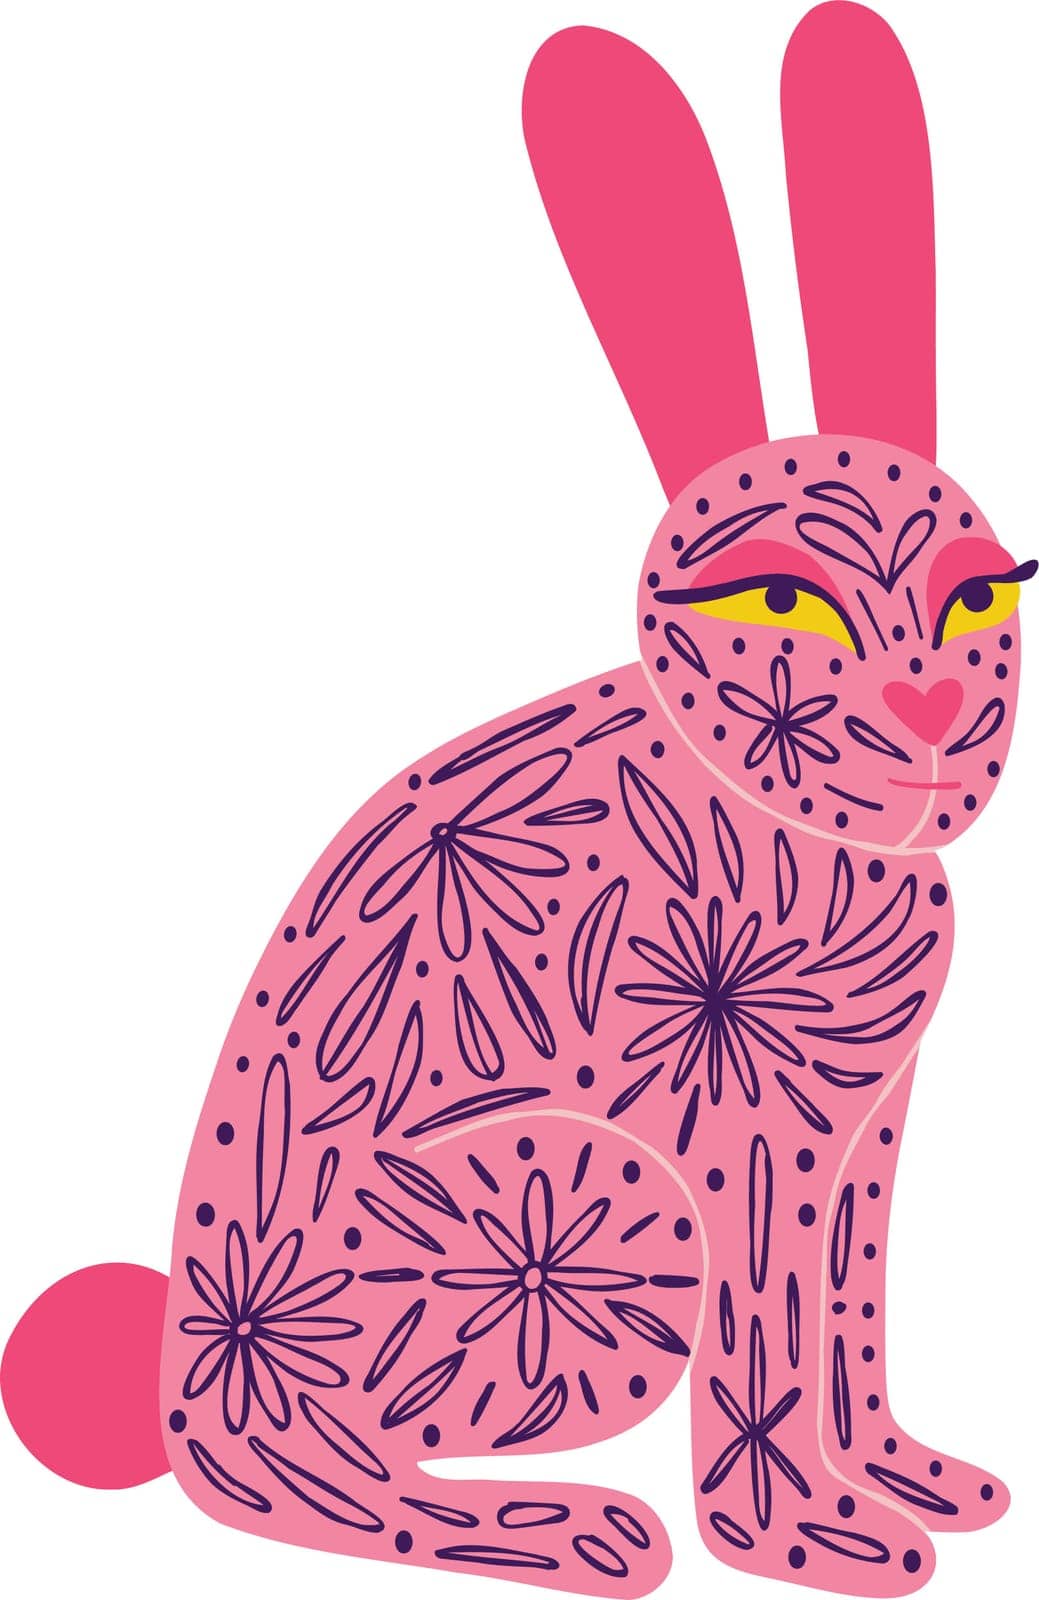 Cute pink rabbit with tattoos Illustration in a modern childish hand-drawn style by Dustick